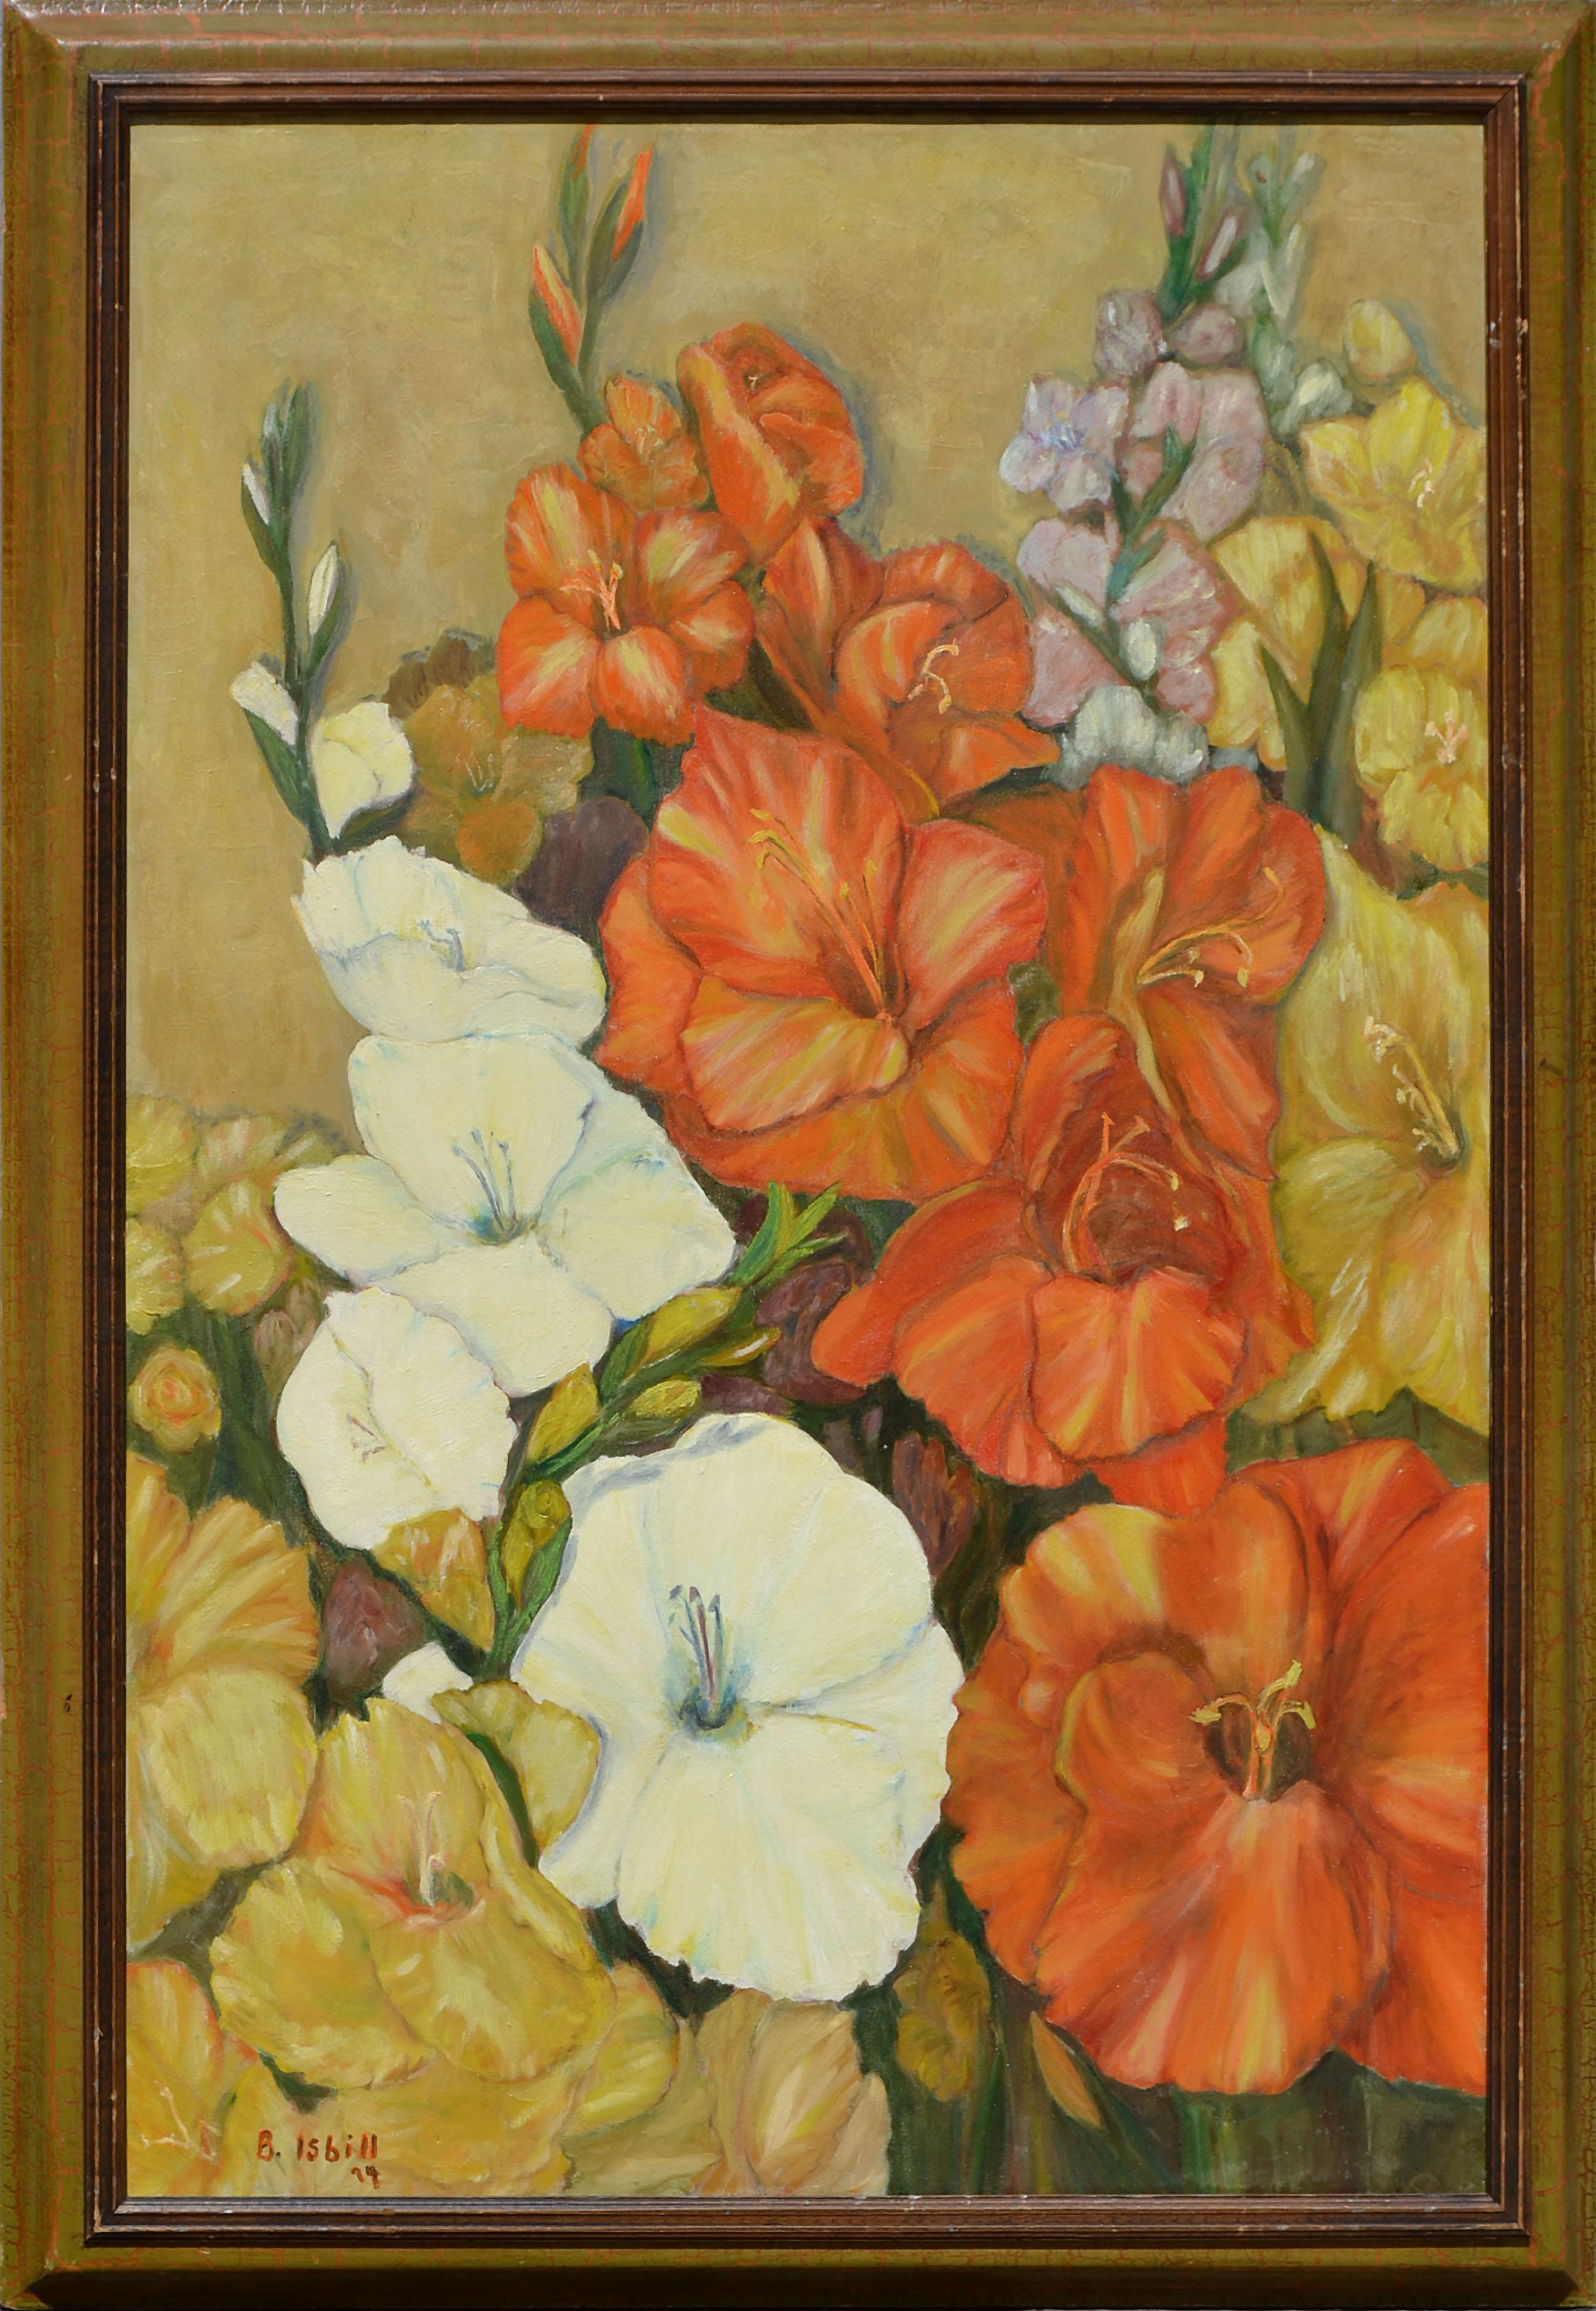 Still-Life Painting B Isbill - Gladiolas in Bloom - Nature morte florale des années 1970